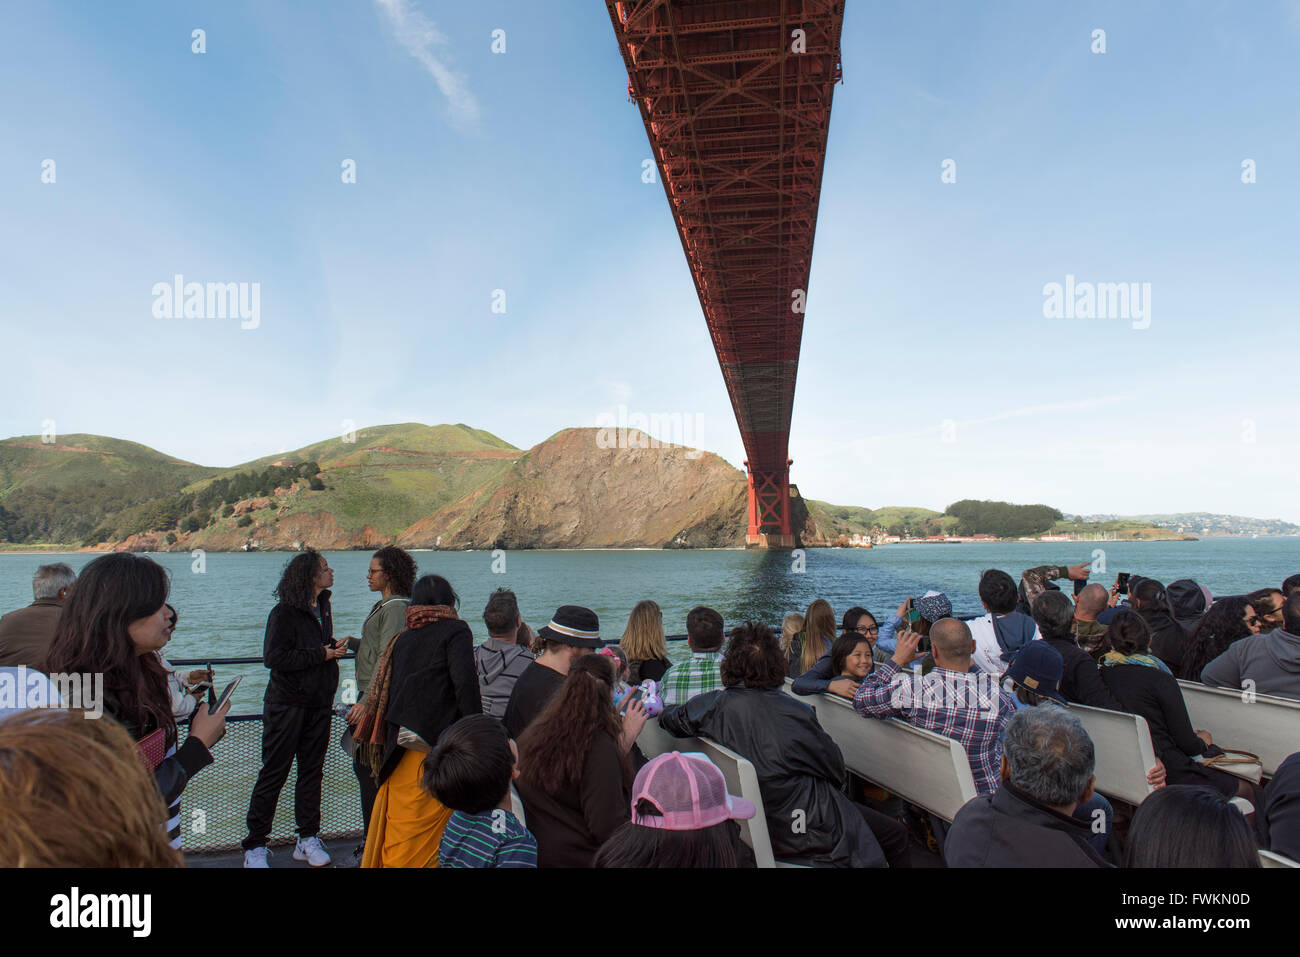 Sightseers on a boat directly underneath the Golden Gate Bridge, in San Francisco Bay, California, USA Stock Photo